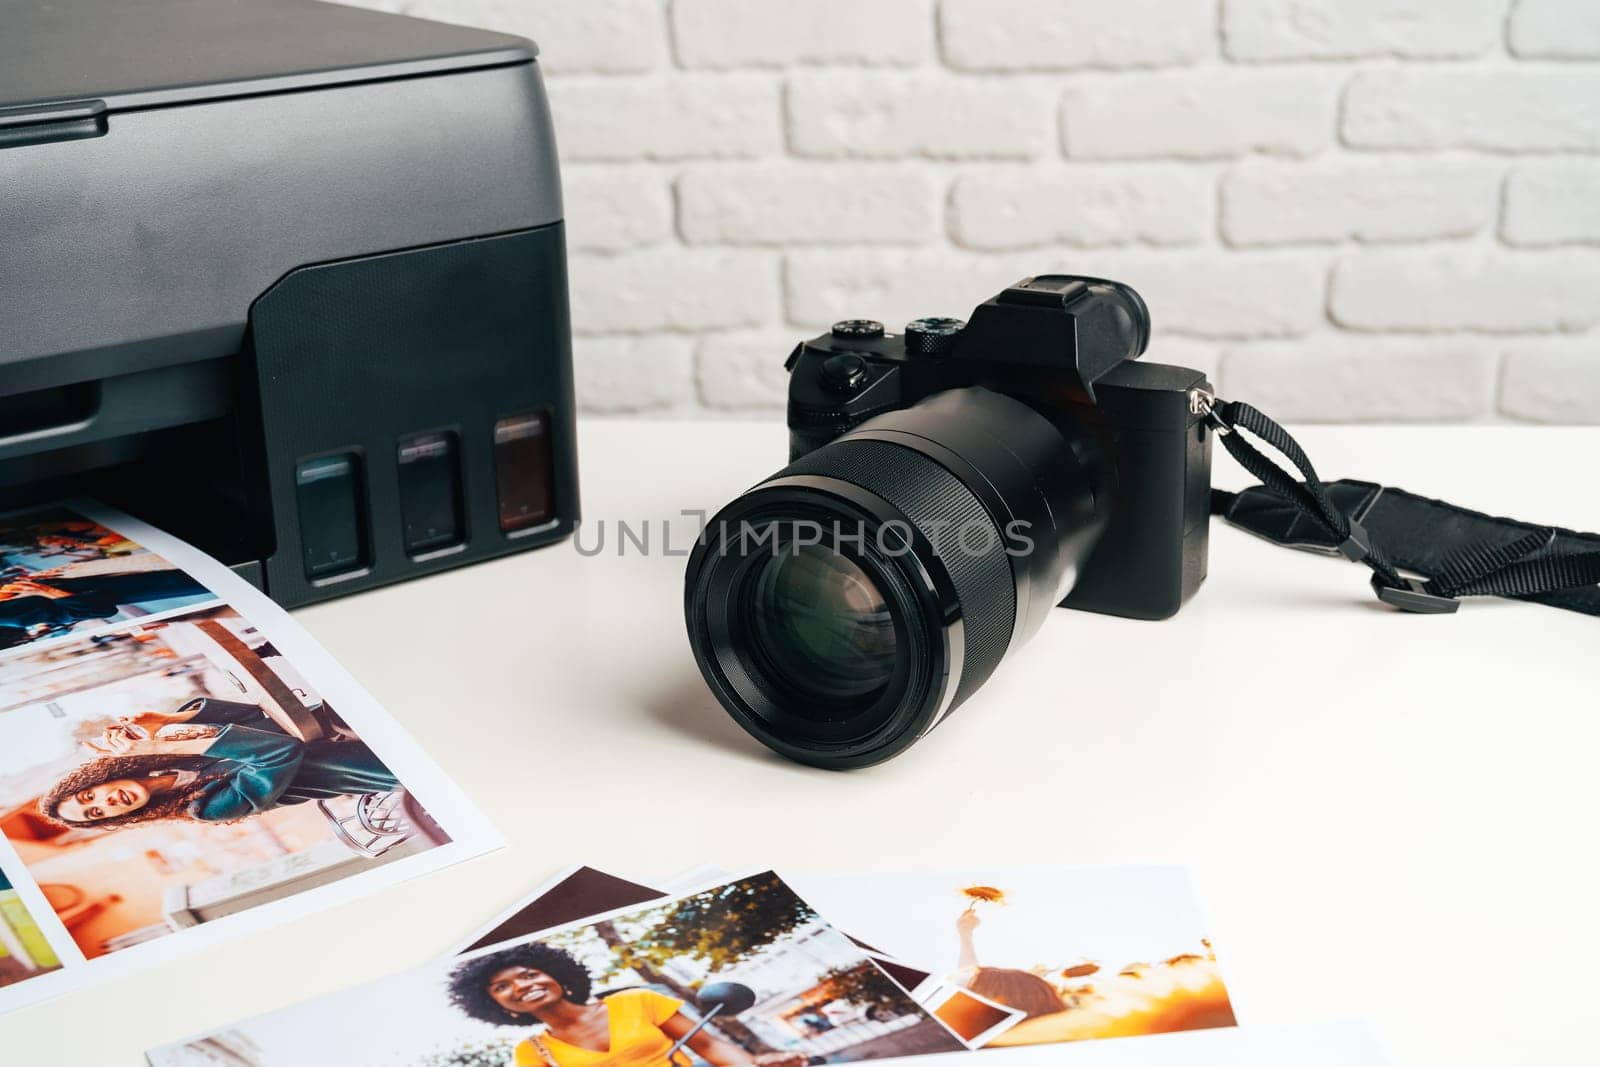 Printer and photo camera on the table. Printing photos concept